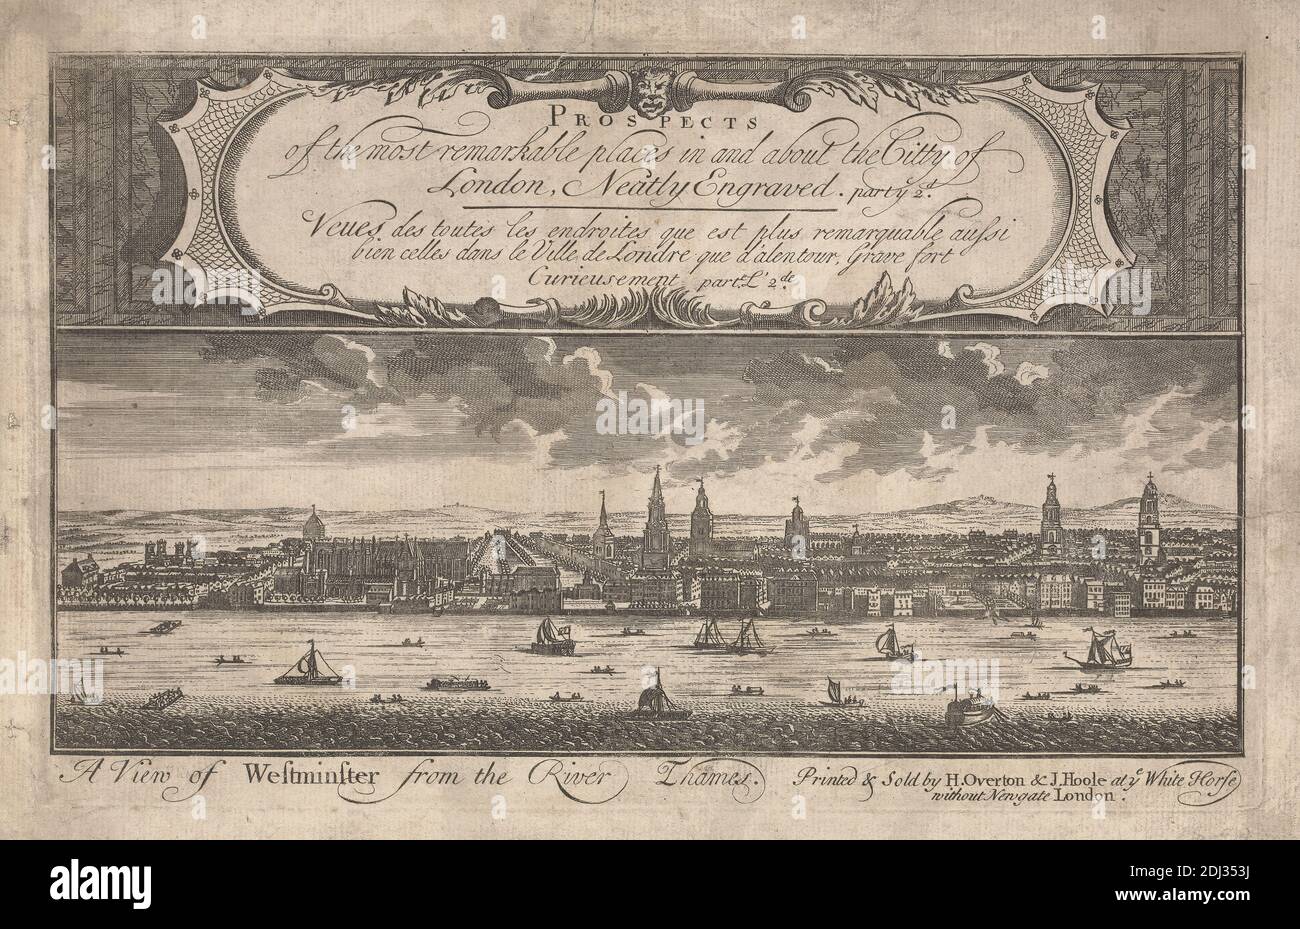 A View of Westminster from the River Thames, unknown artist, seventeenth century-eighteenth century, after unknown artist, undated, Engraving Stock Photo